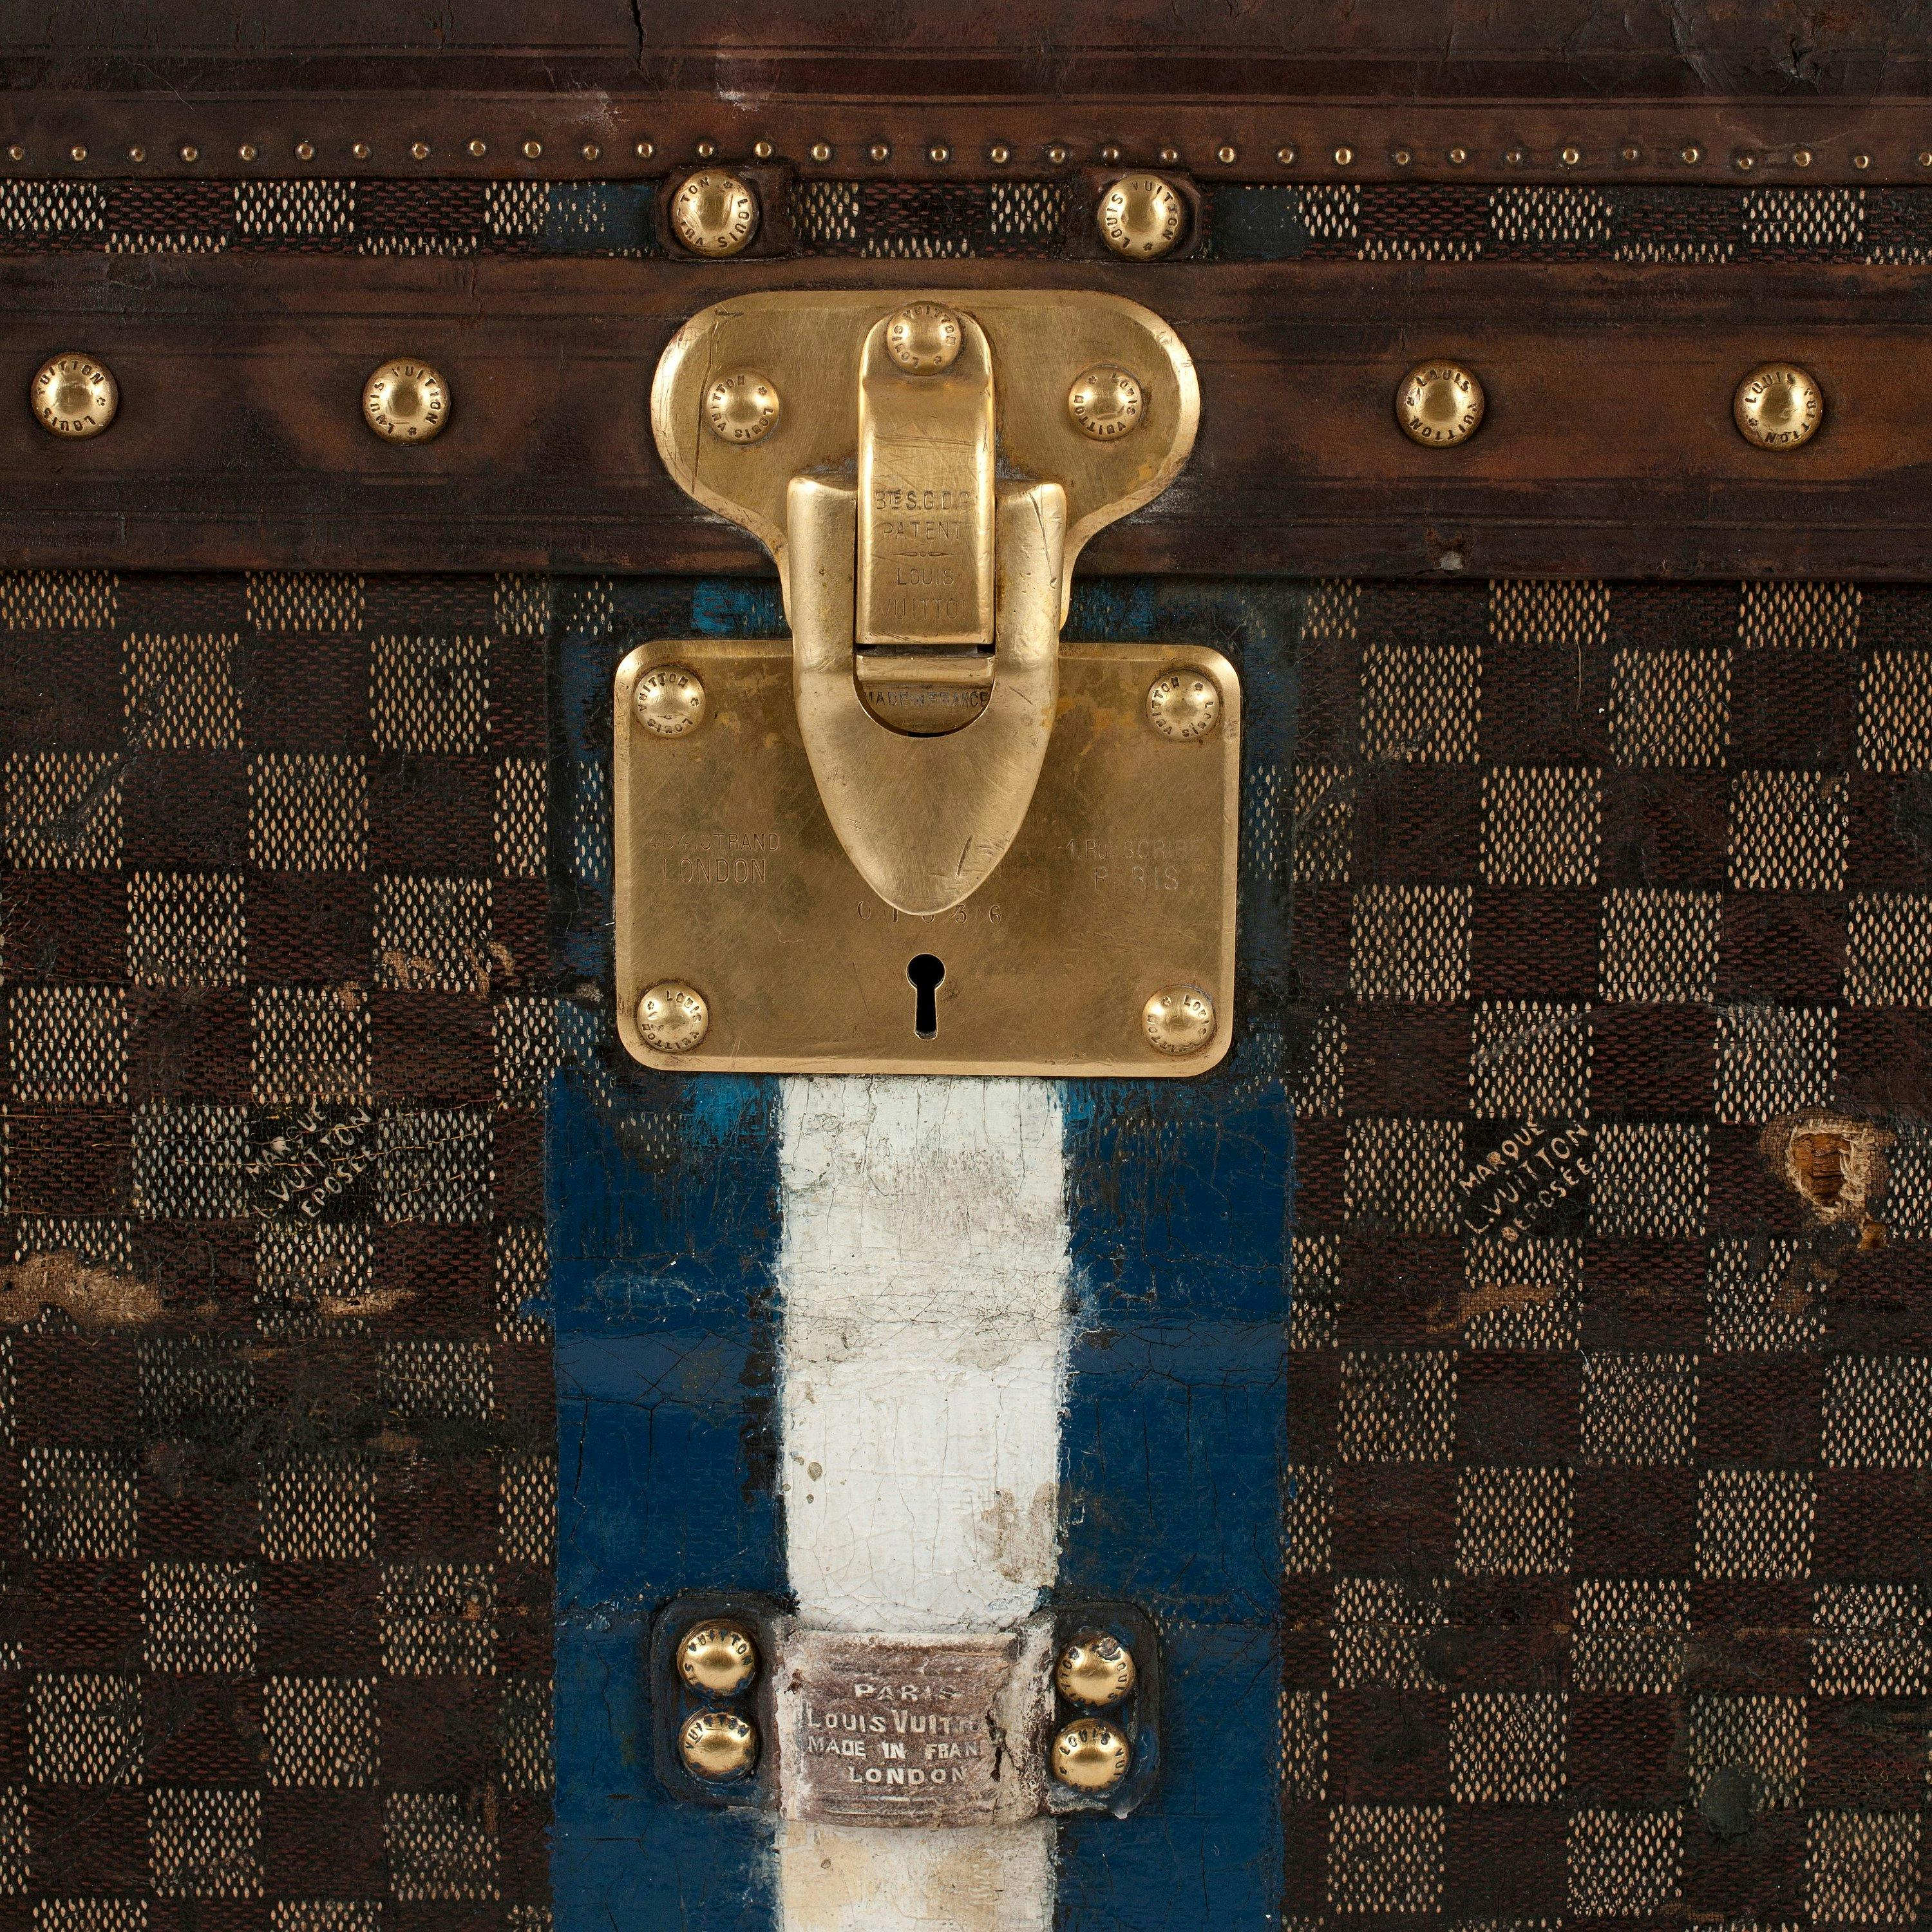 4 Luxury Trunk Makers Will Build the Bespoke Luggage of Your